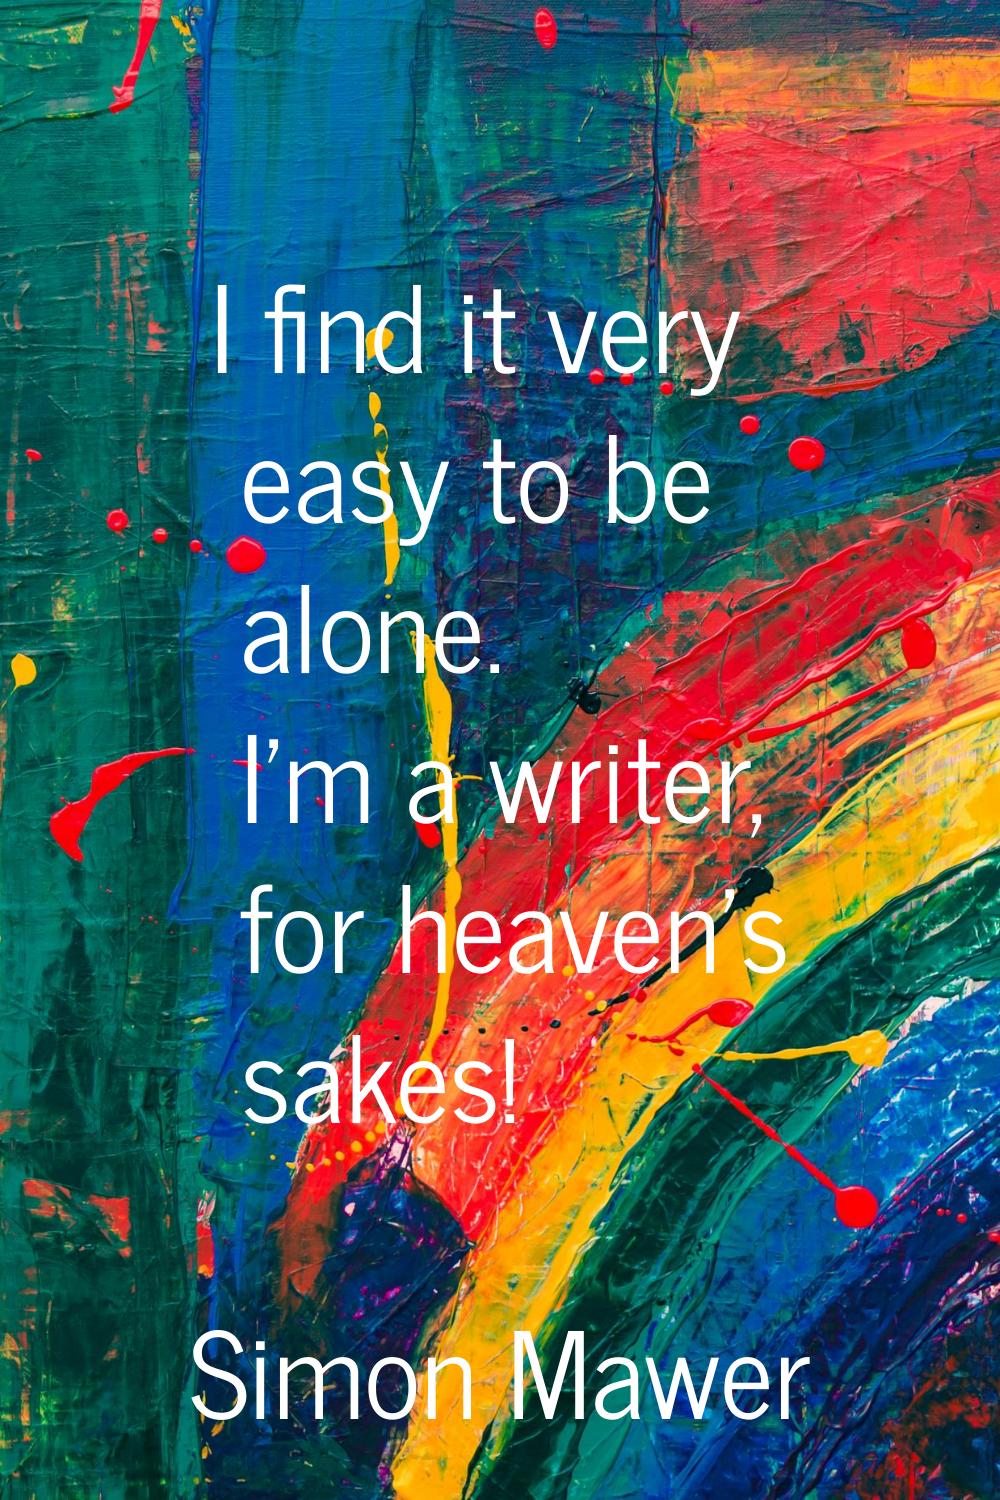 I find it very easy to be alone. I'm a writer, for heaven's sakes!